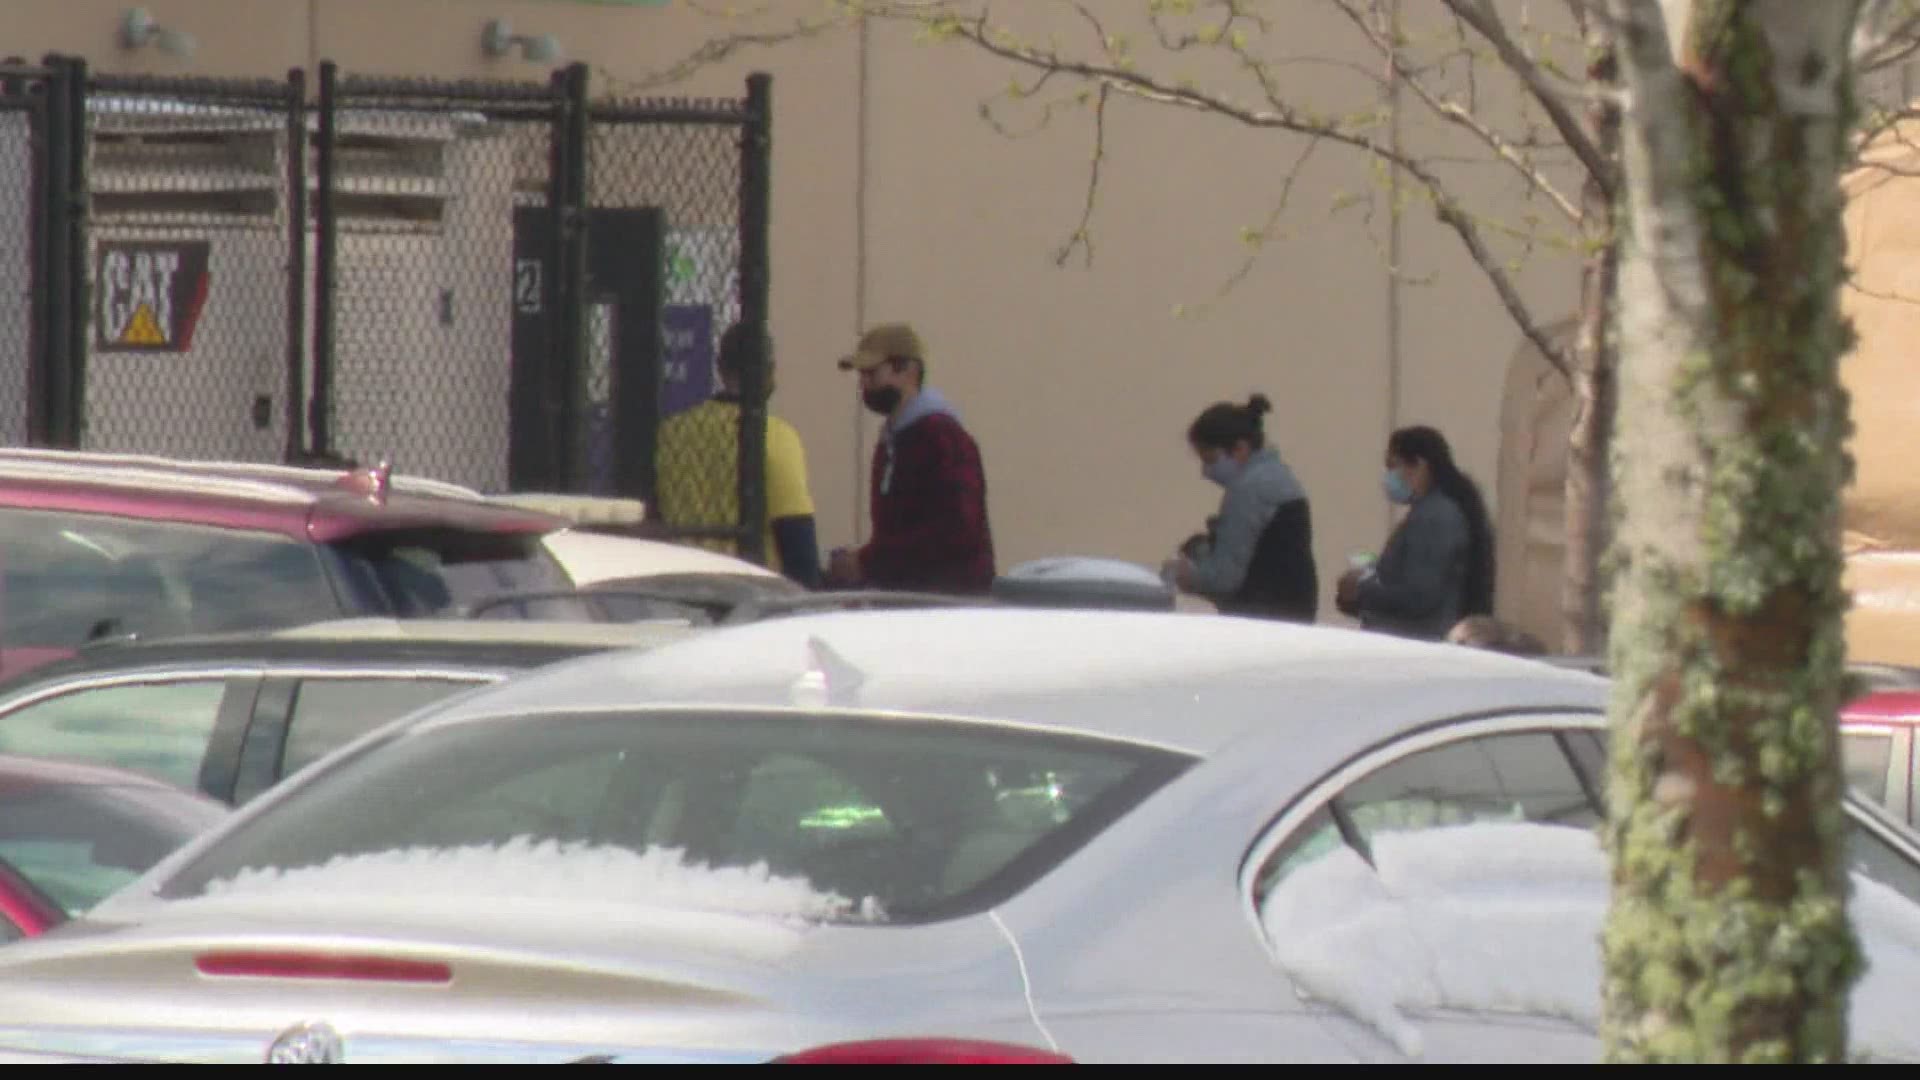 Workers at a FedEx facility on the west side of Indianapolis returned to work for the first time since a mass shooting left 8 people dead last Thursday night.